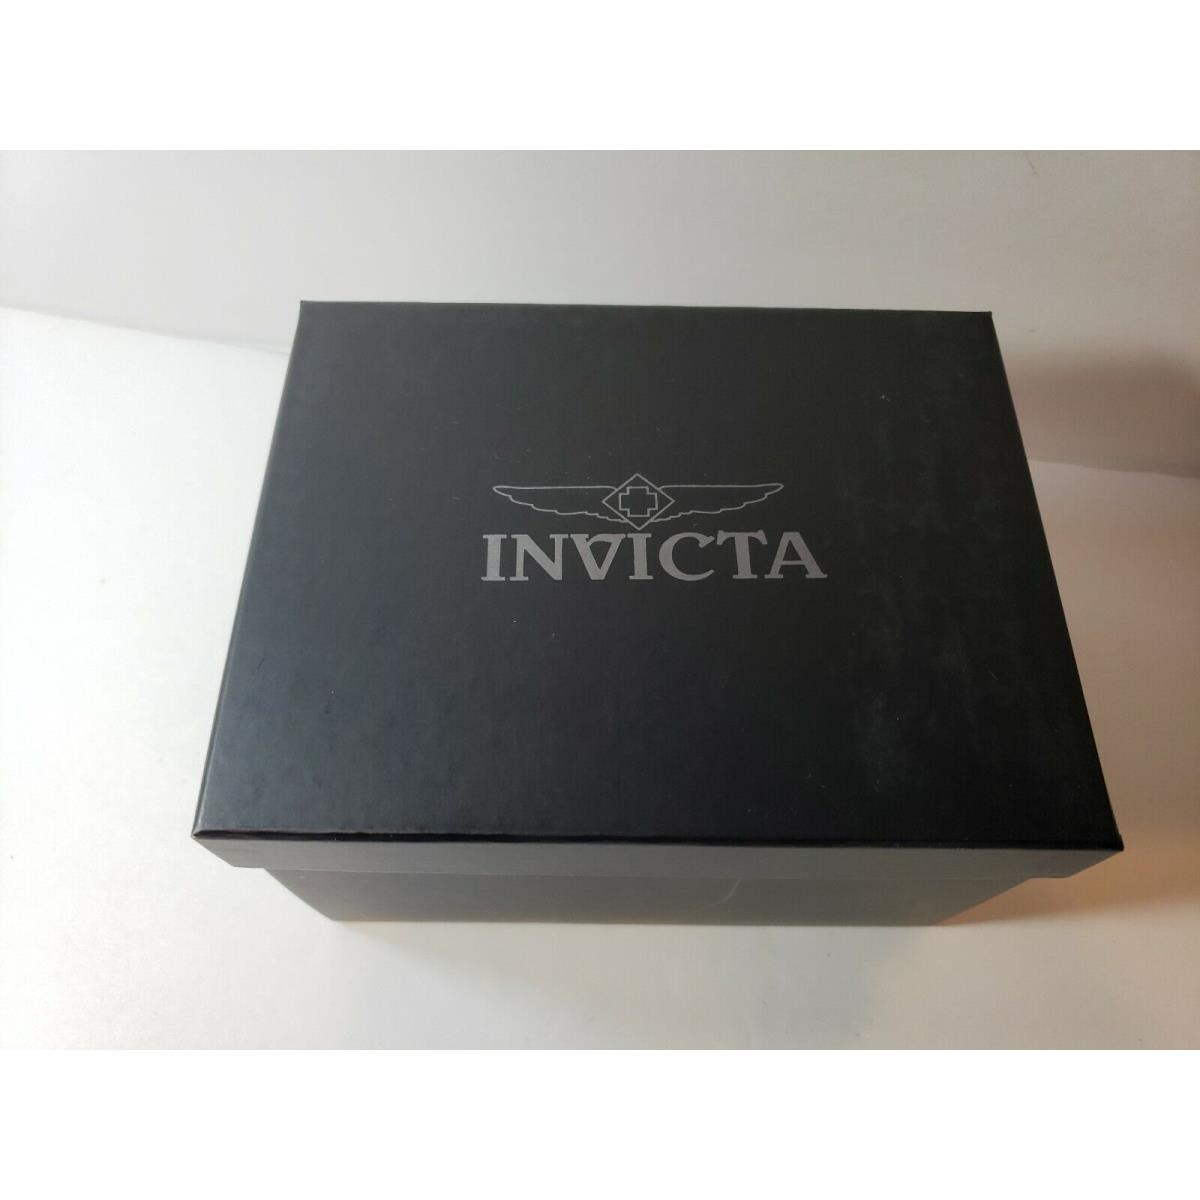 Invicta watch Black Panther - Black Dial, Black Band